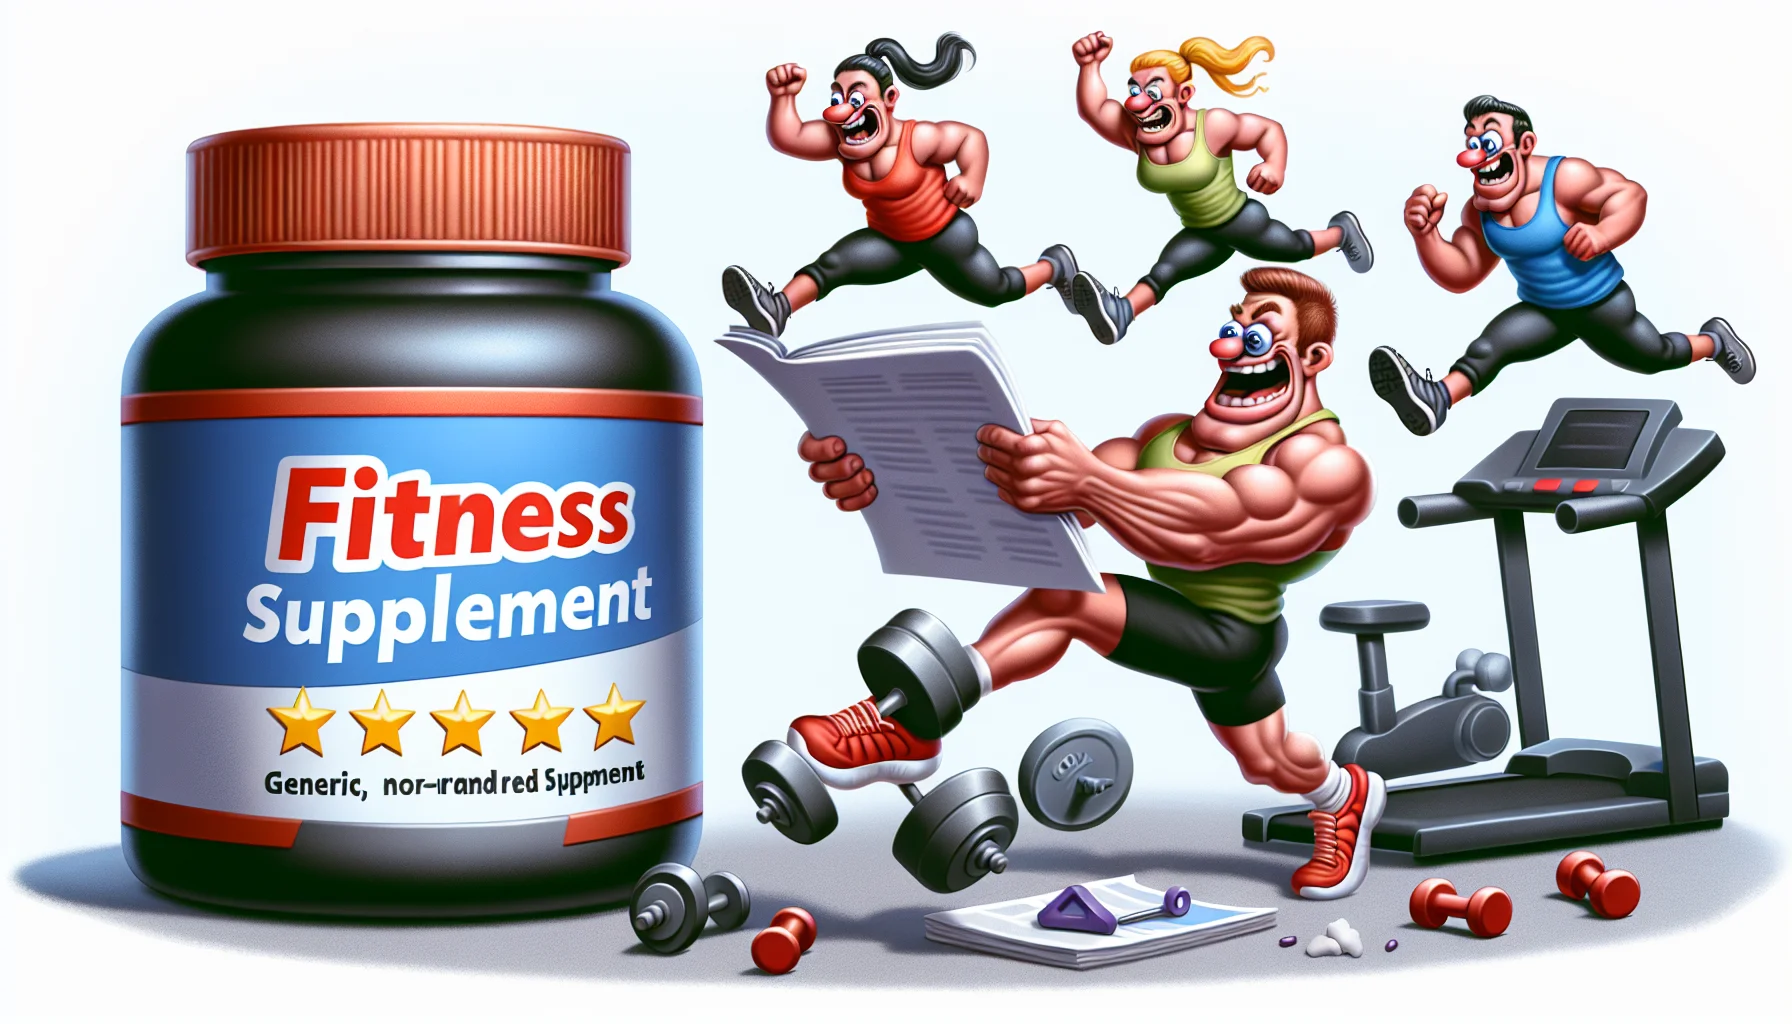 Create a caricatured image illustrating the reviews of a generic, non-branded fitness supplement. This scene should be in a humorous context that encourages people to exercise. Perhaps it shows humorous characters reading the reviews while performing exaggerated exercises like jumping jacks or running on a treadmill. The product itself can be symbolized by a generic bottle with the words 'Fitness Supplement' on it.